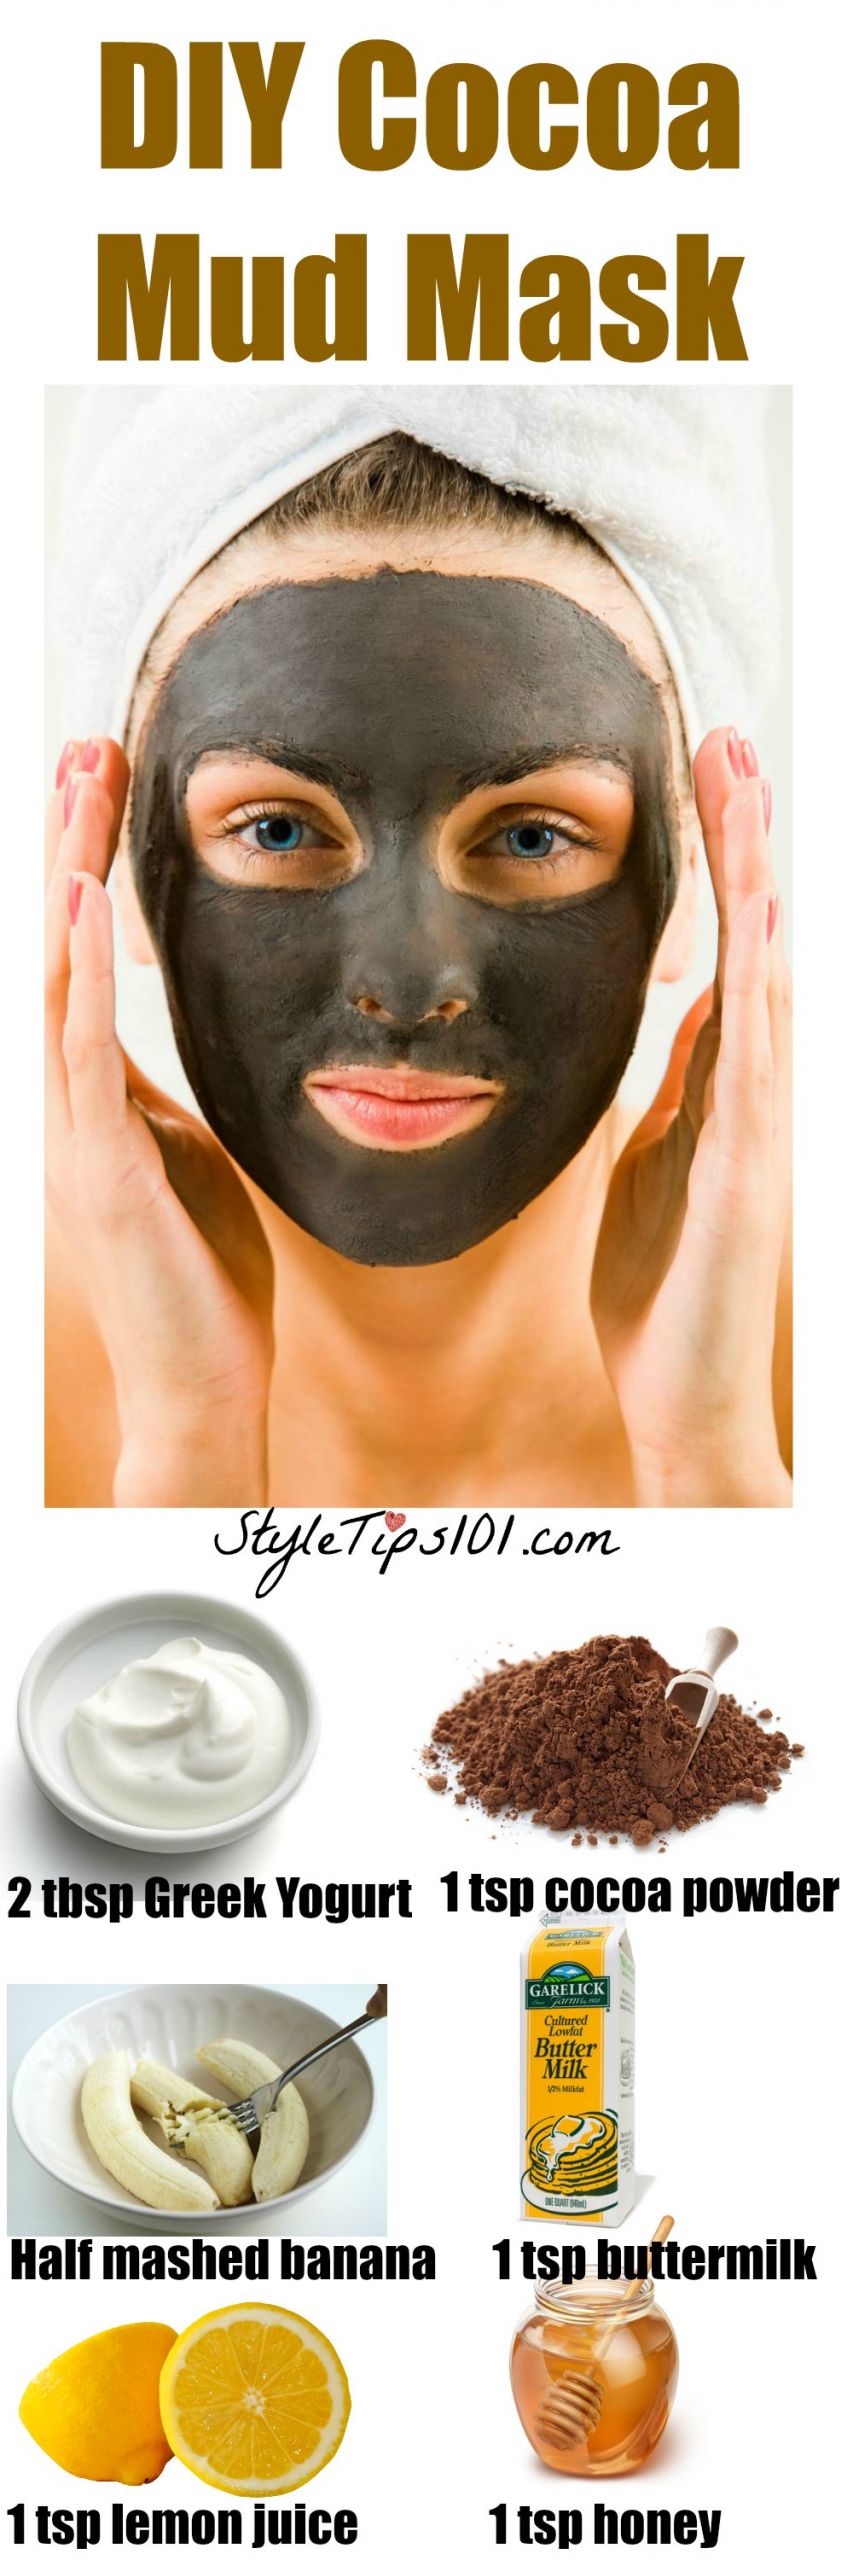 DIY Mud Mask
 DIY Mud Mask For Acne Prone and Oily Skin